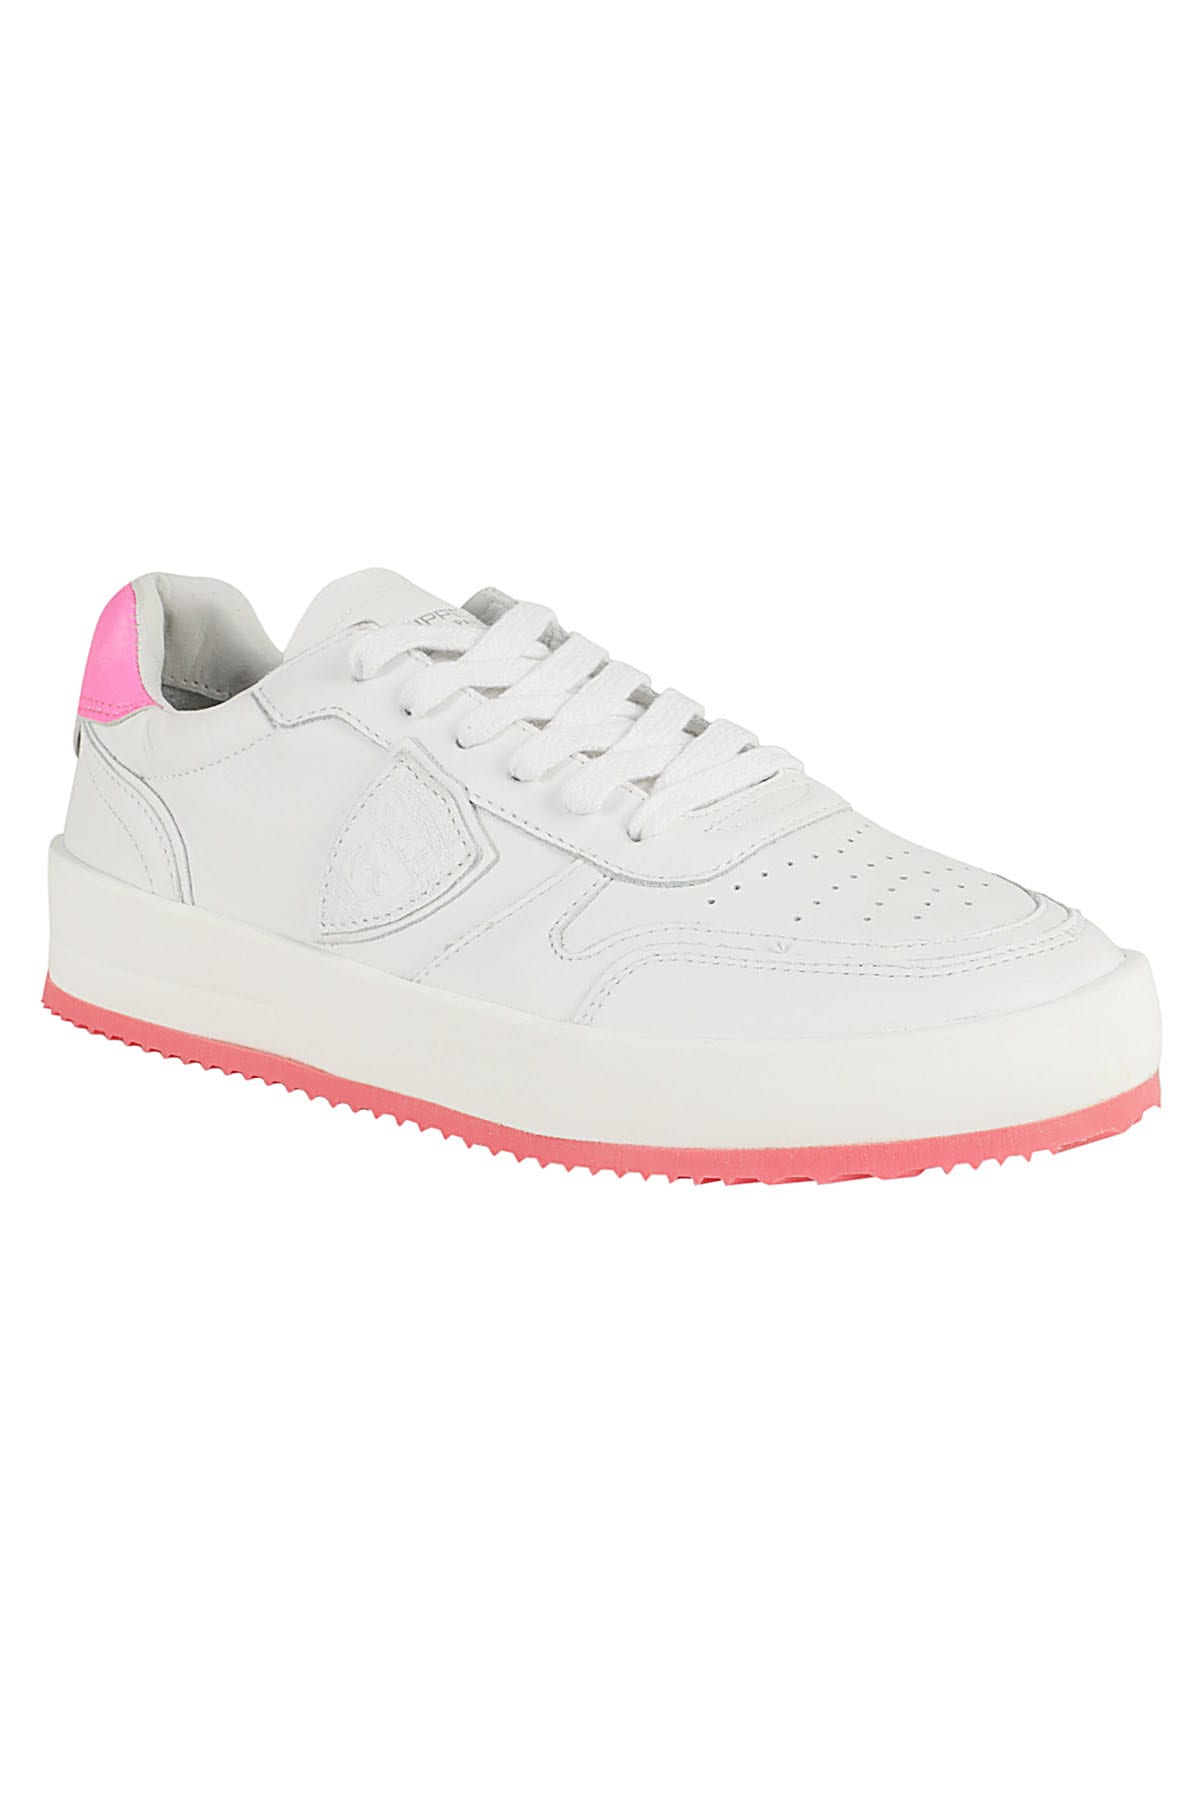 Shop Philippe Model Nice Low Woman In Veau Neon Blanc Fucsia